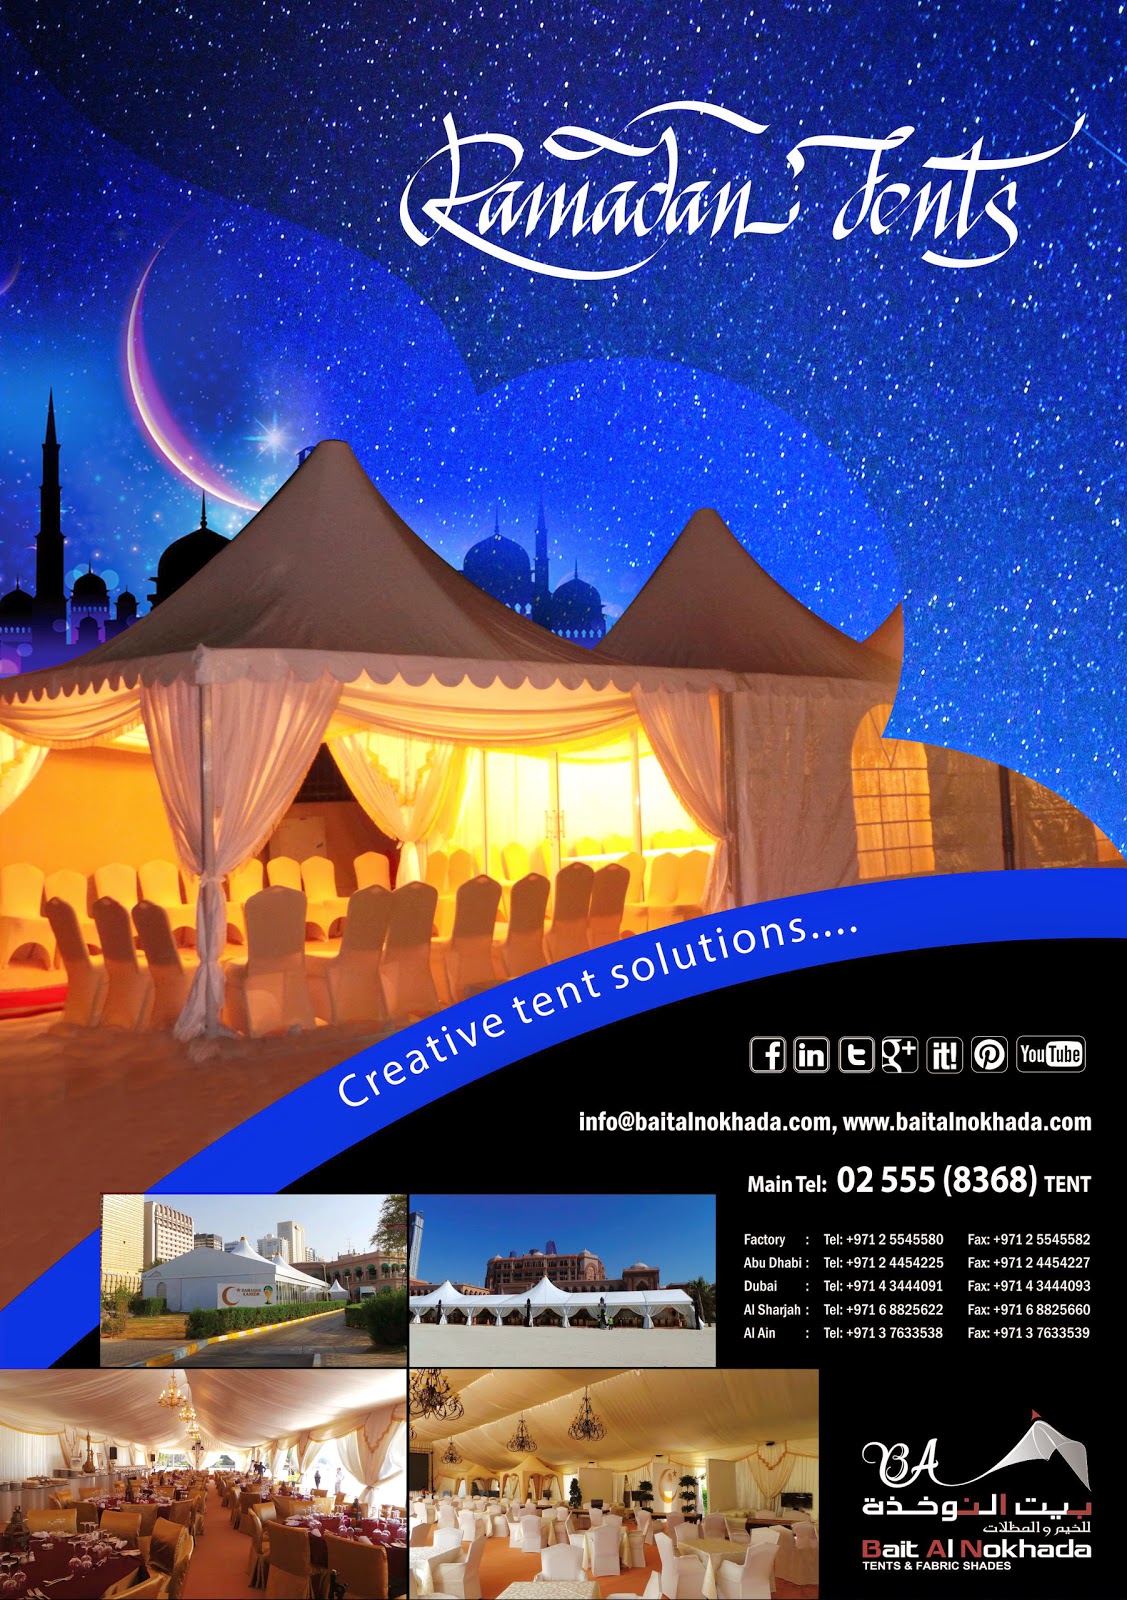 Bait Al Nokhada - The Leader in Tents & Shades Industry 